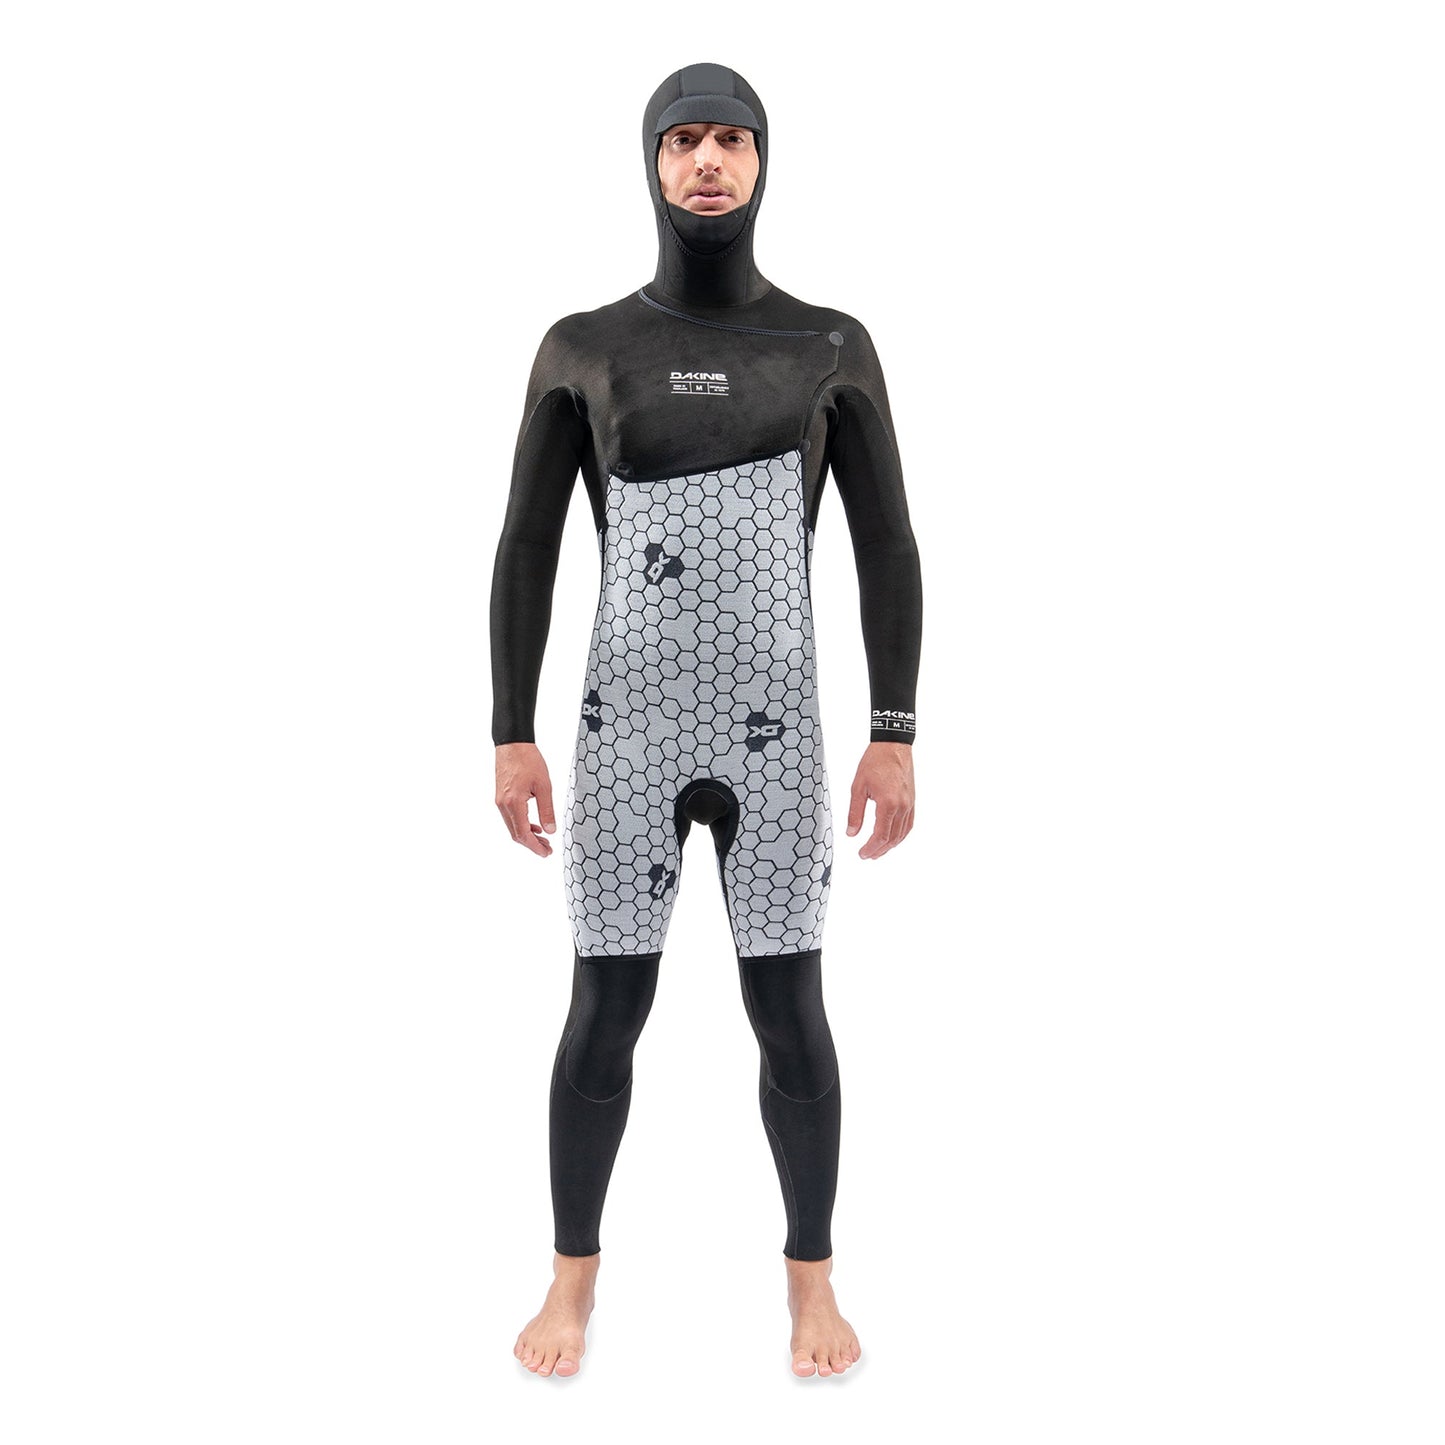 Mens Mission Chest Zip Hooded 6/5/4mm Full Wetsuit (Black)